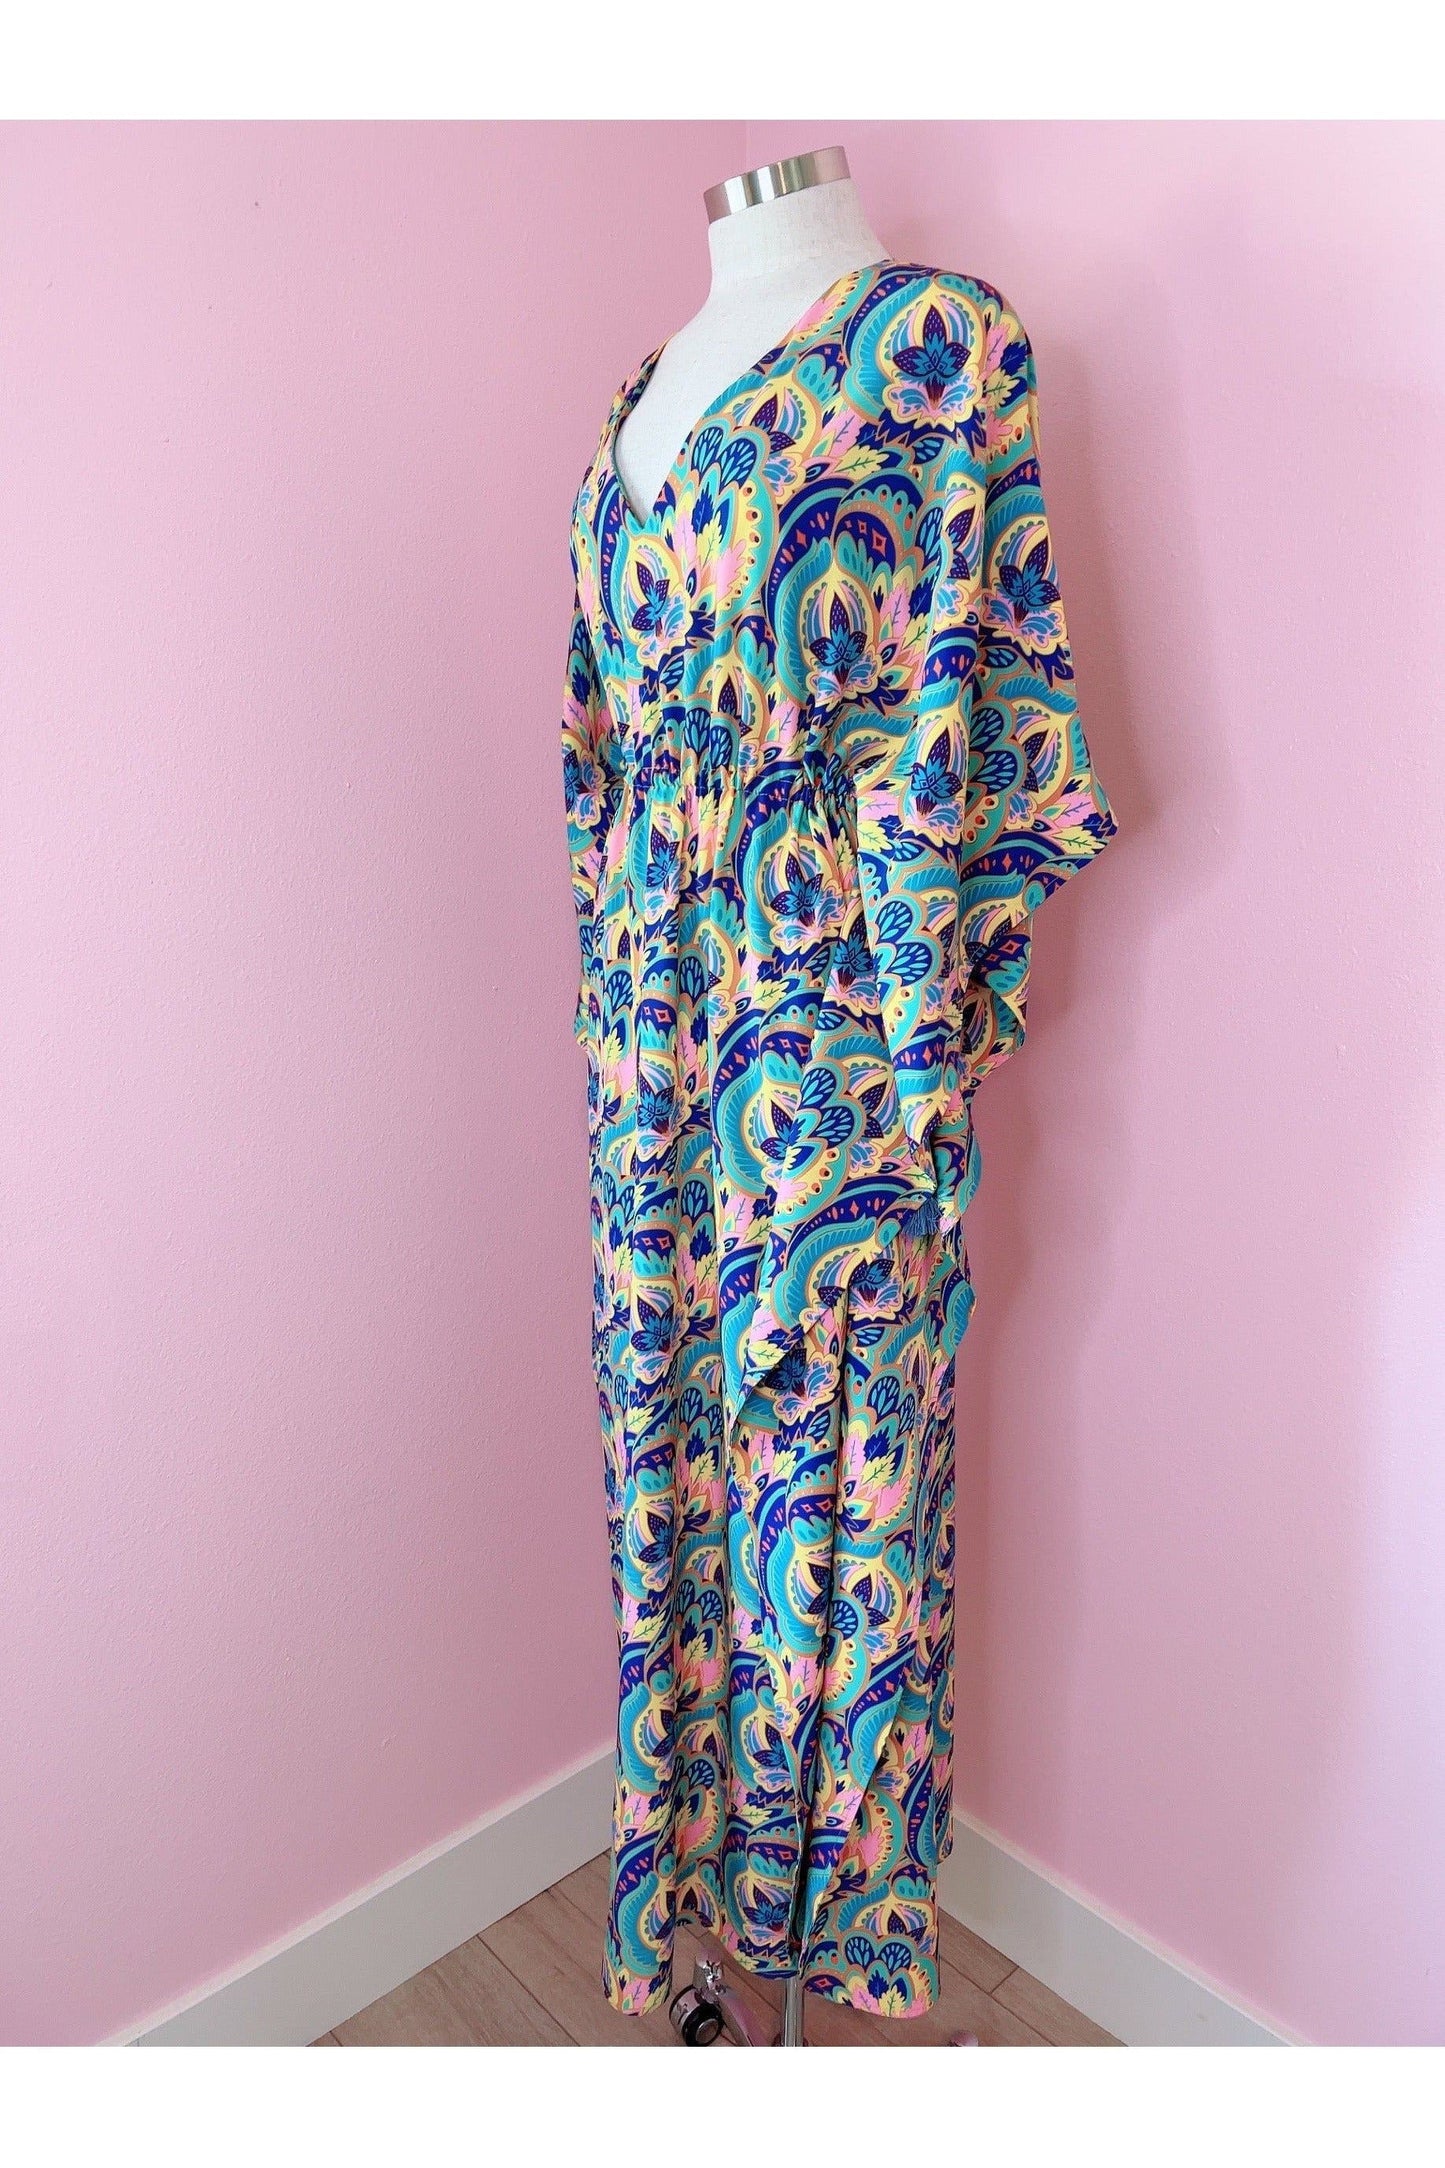 Rapture Colorful Abstract Everyday Caftan Designer Dress